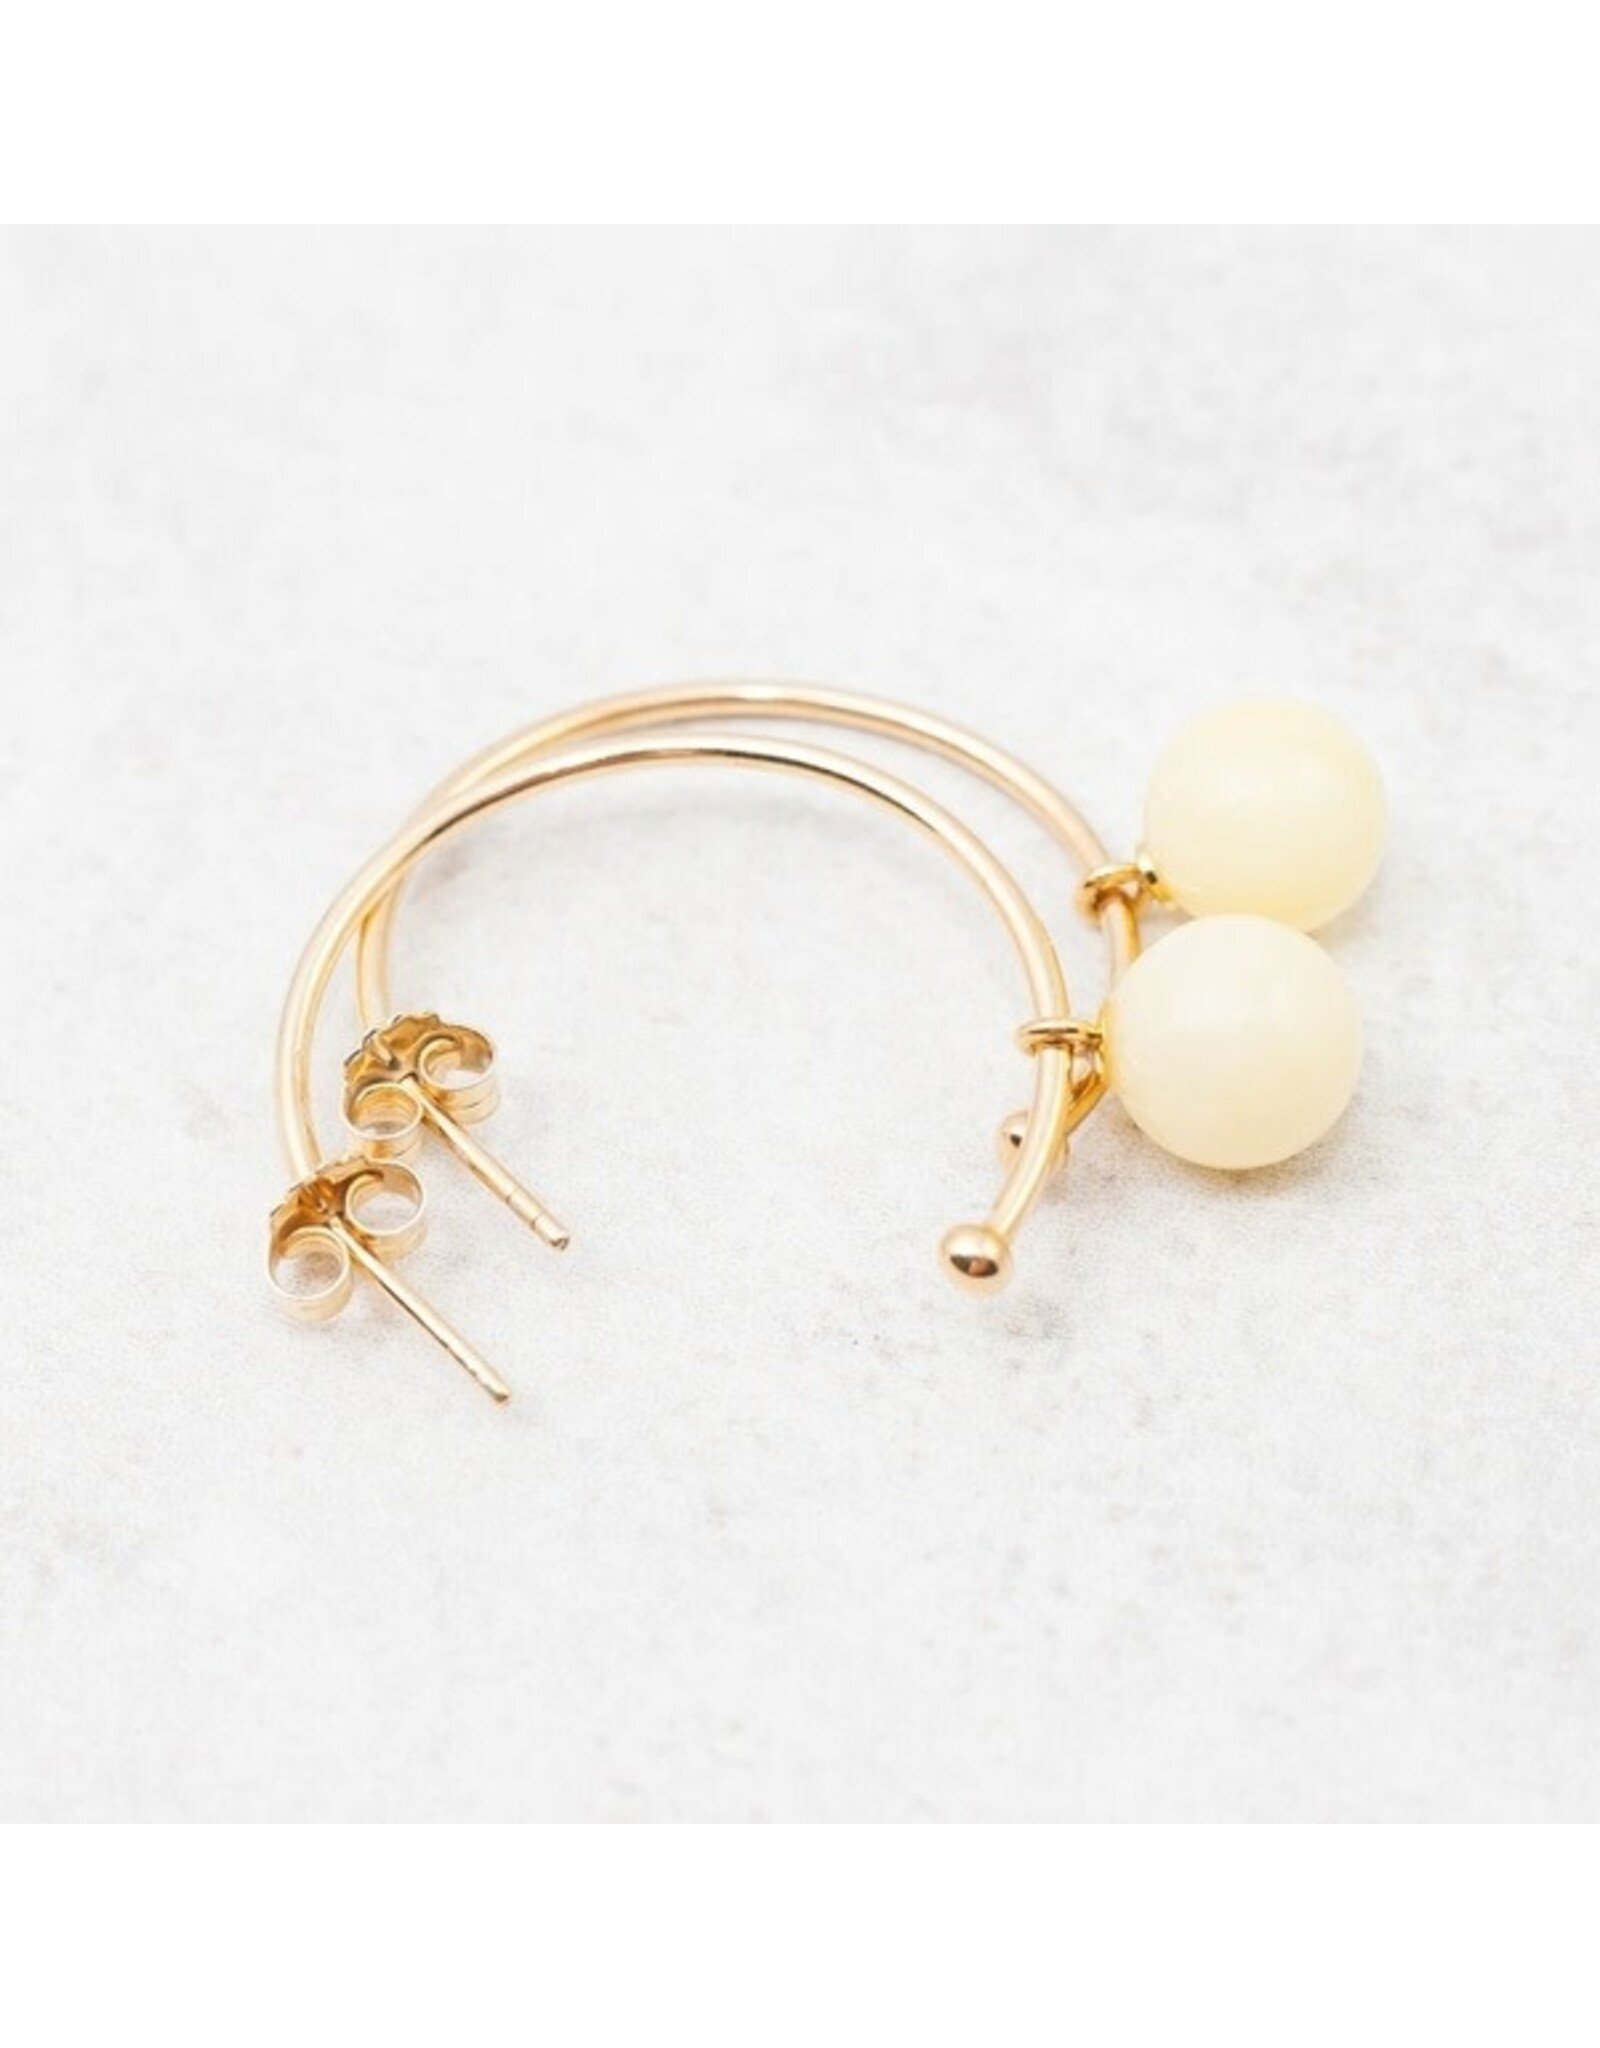 Butterscotch Amber925 Sterling Silver Gold Plated Hoop Earrings